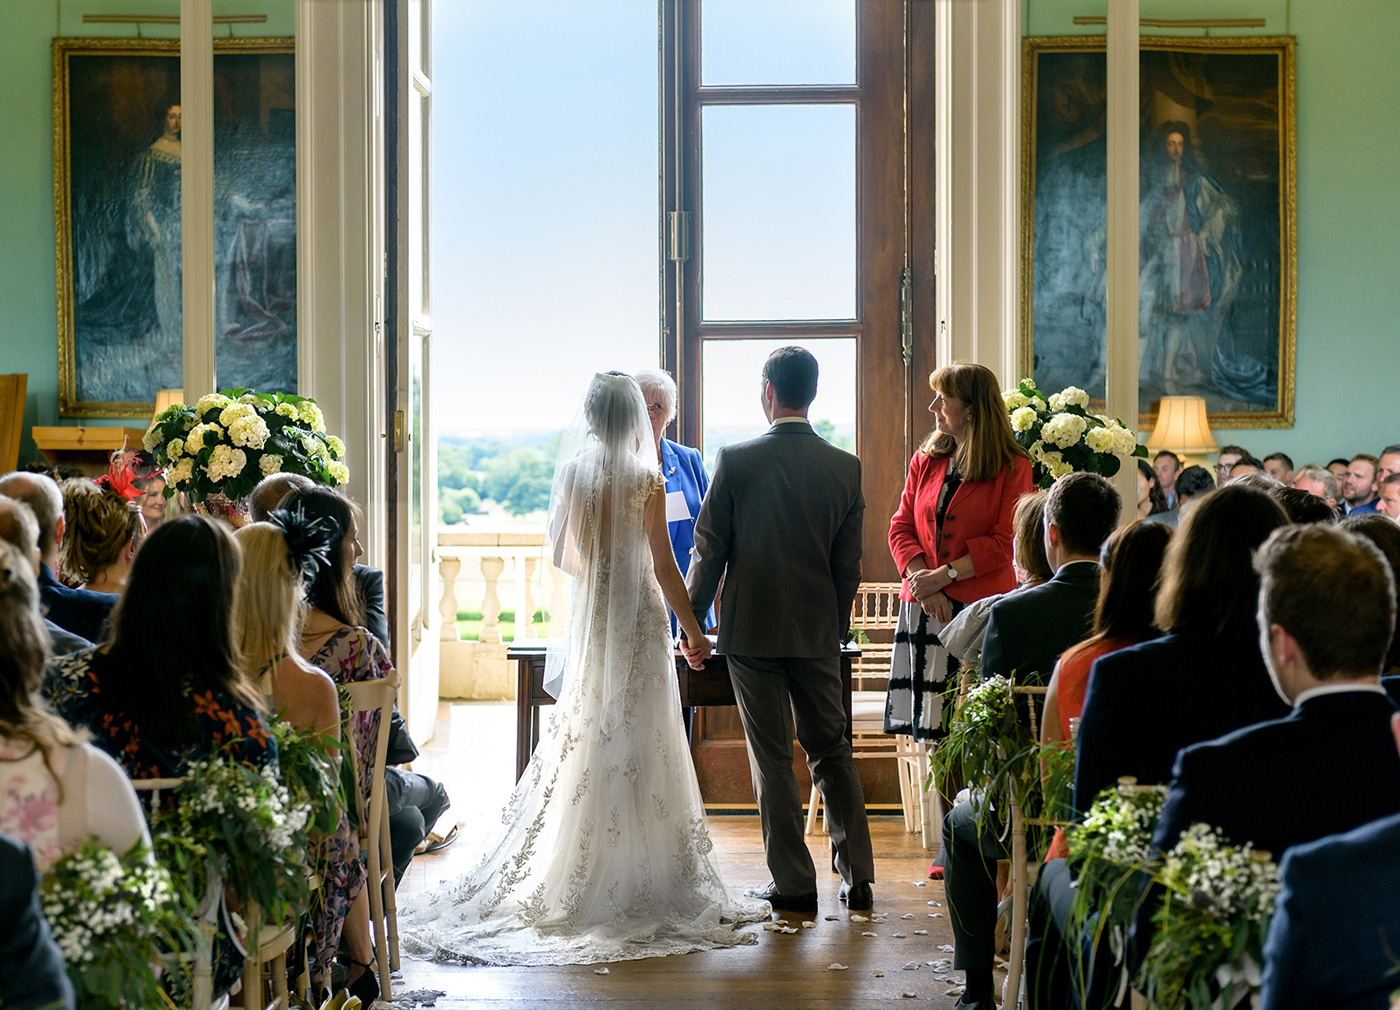 Wedding ceremony in the Saloon at Kirtlington Park